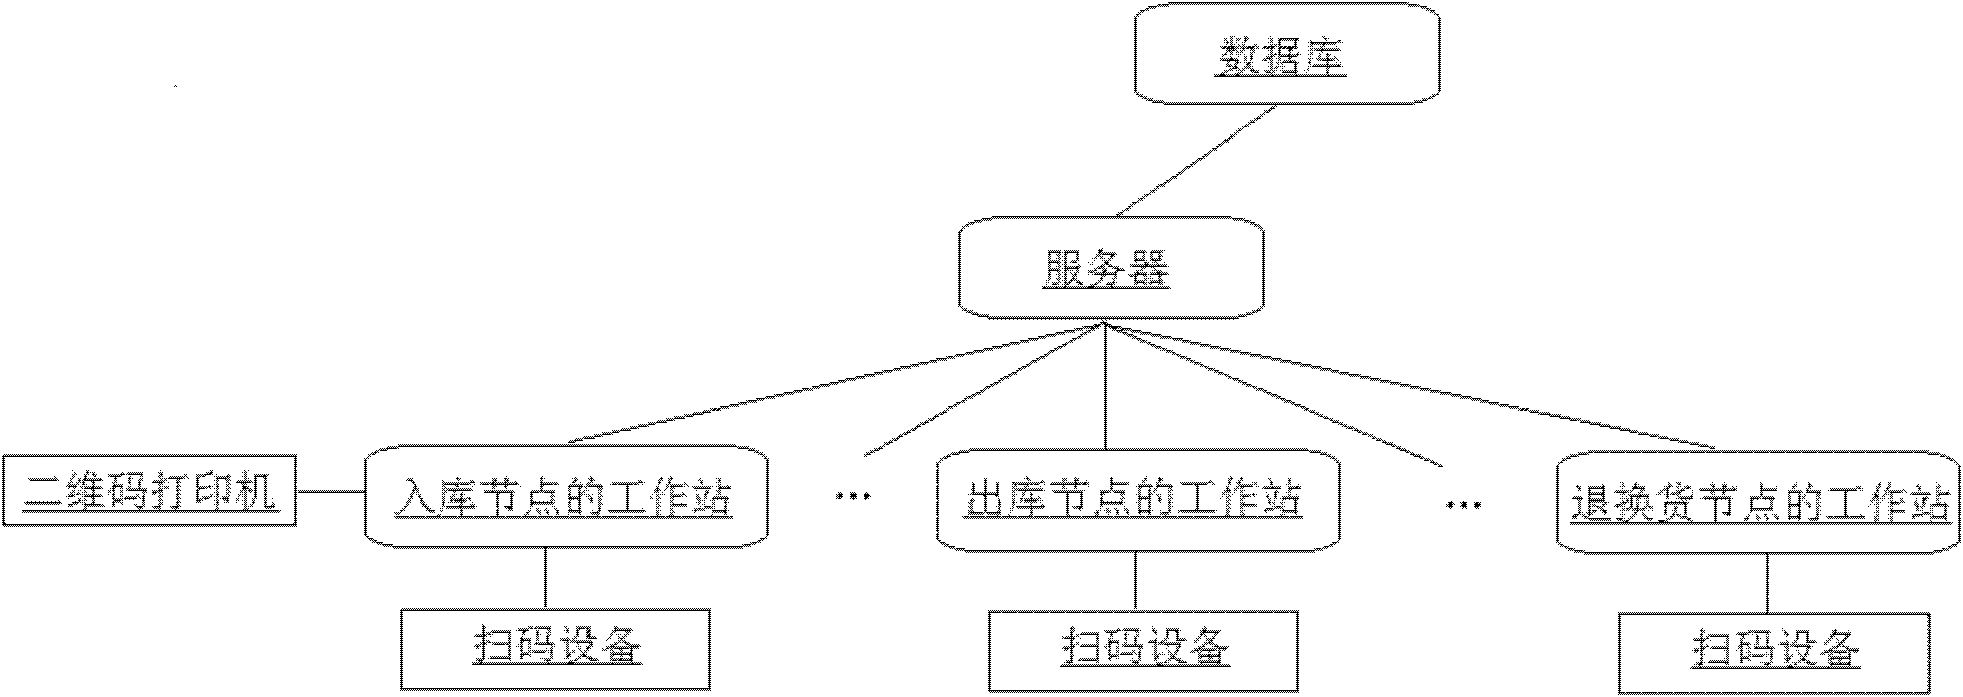 Invoicing system for automobile accessories based on two-dimensional code